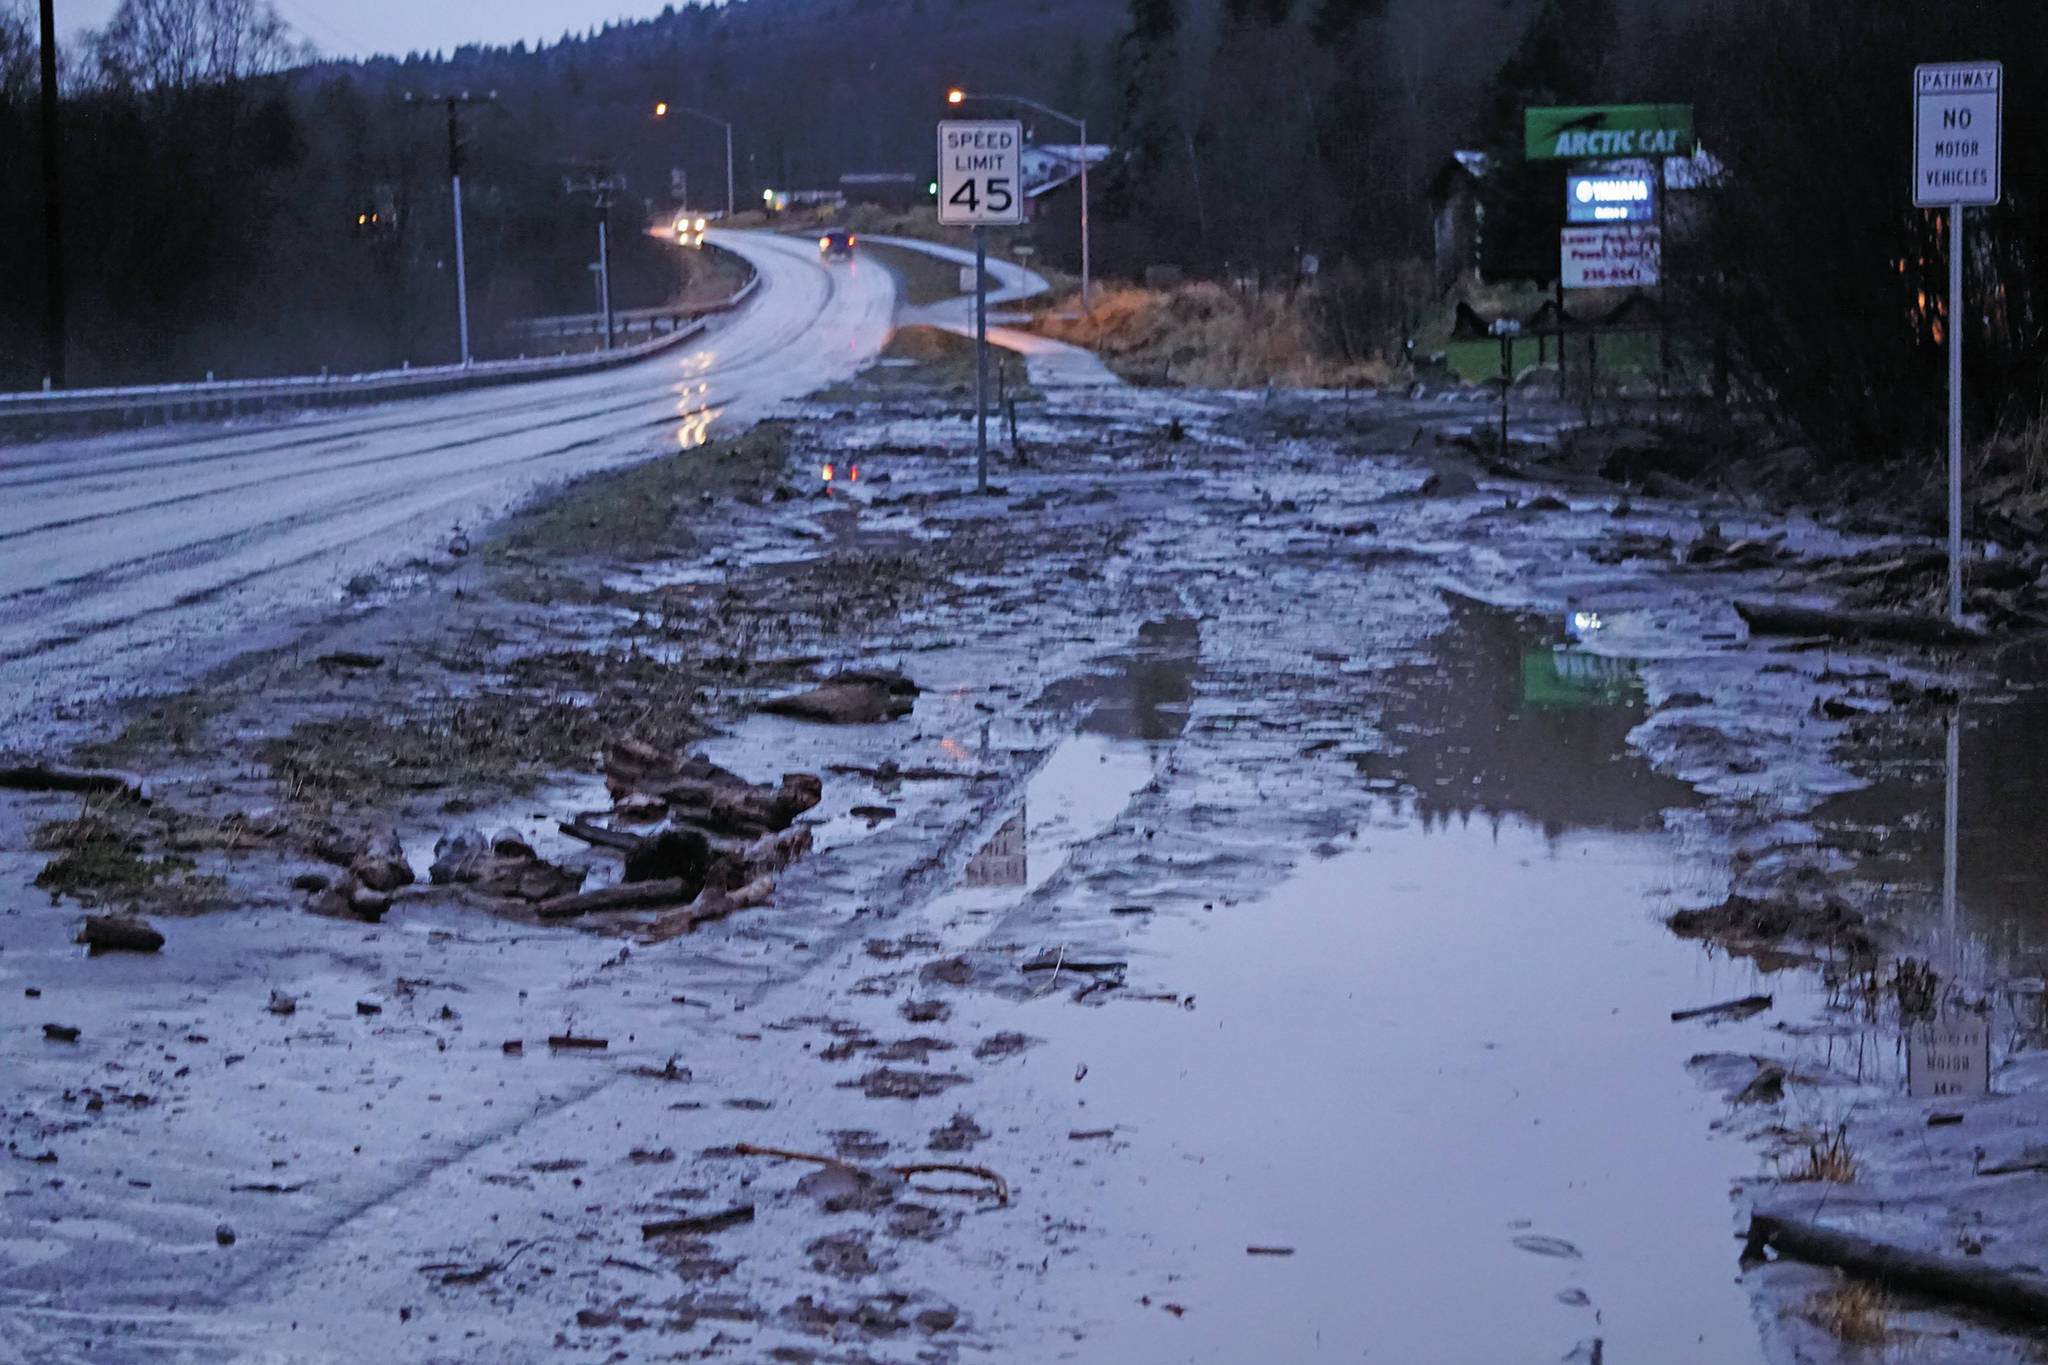 Michael Armstrong / Homer News                                Mud and debris is washed up at Bear Creek near East End Road on Monday afternoon in Homer. Bear Creek crosses East End Road near Bear Creek Drive and overflowed the creek banks.